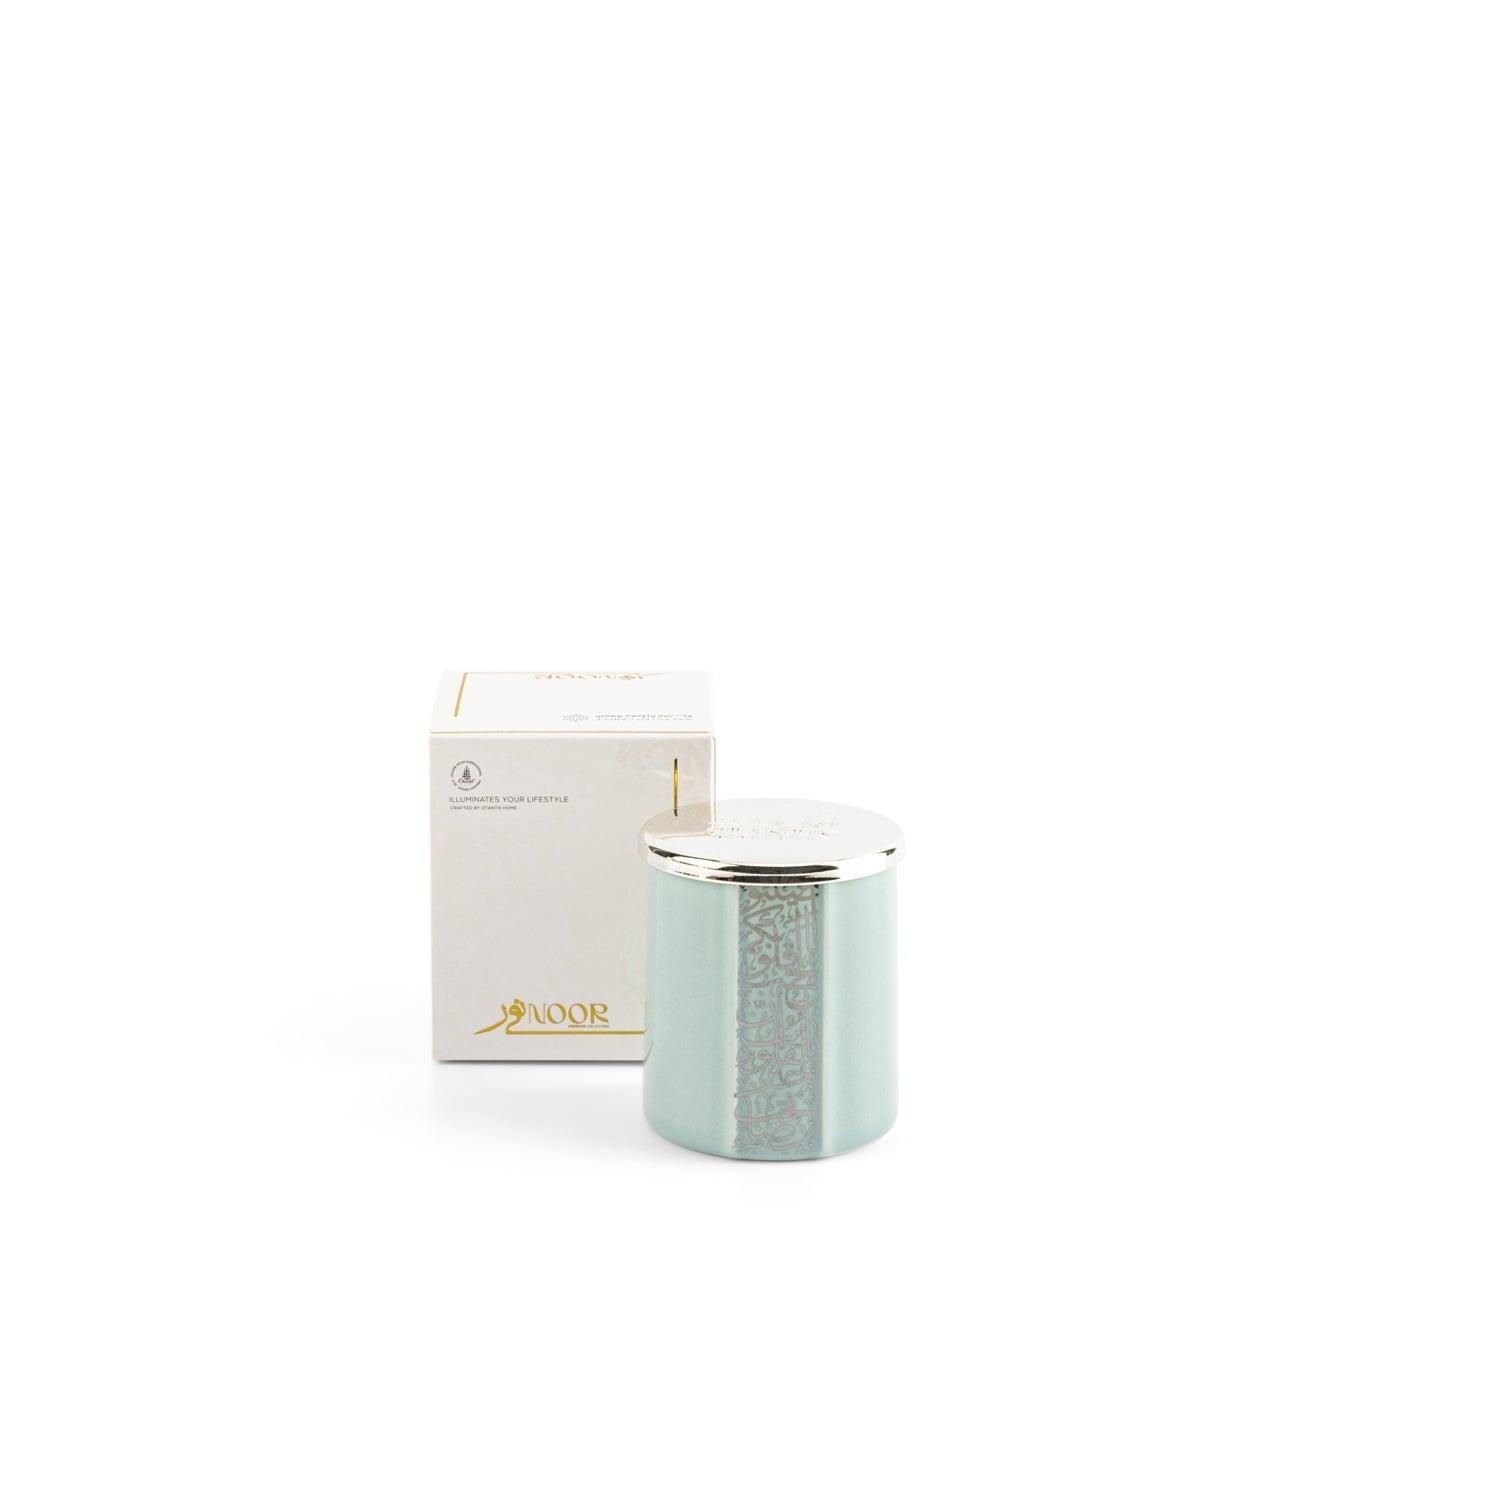 Musky Rose Luxury Candle From Otantik - Small